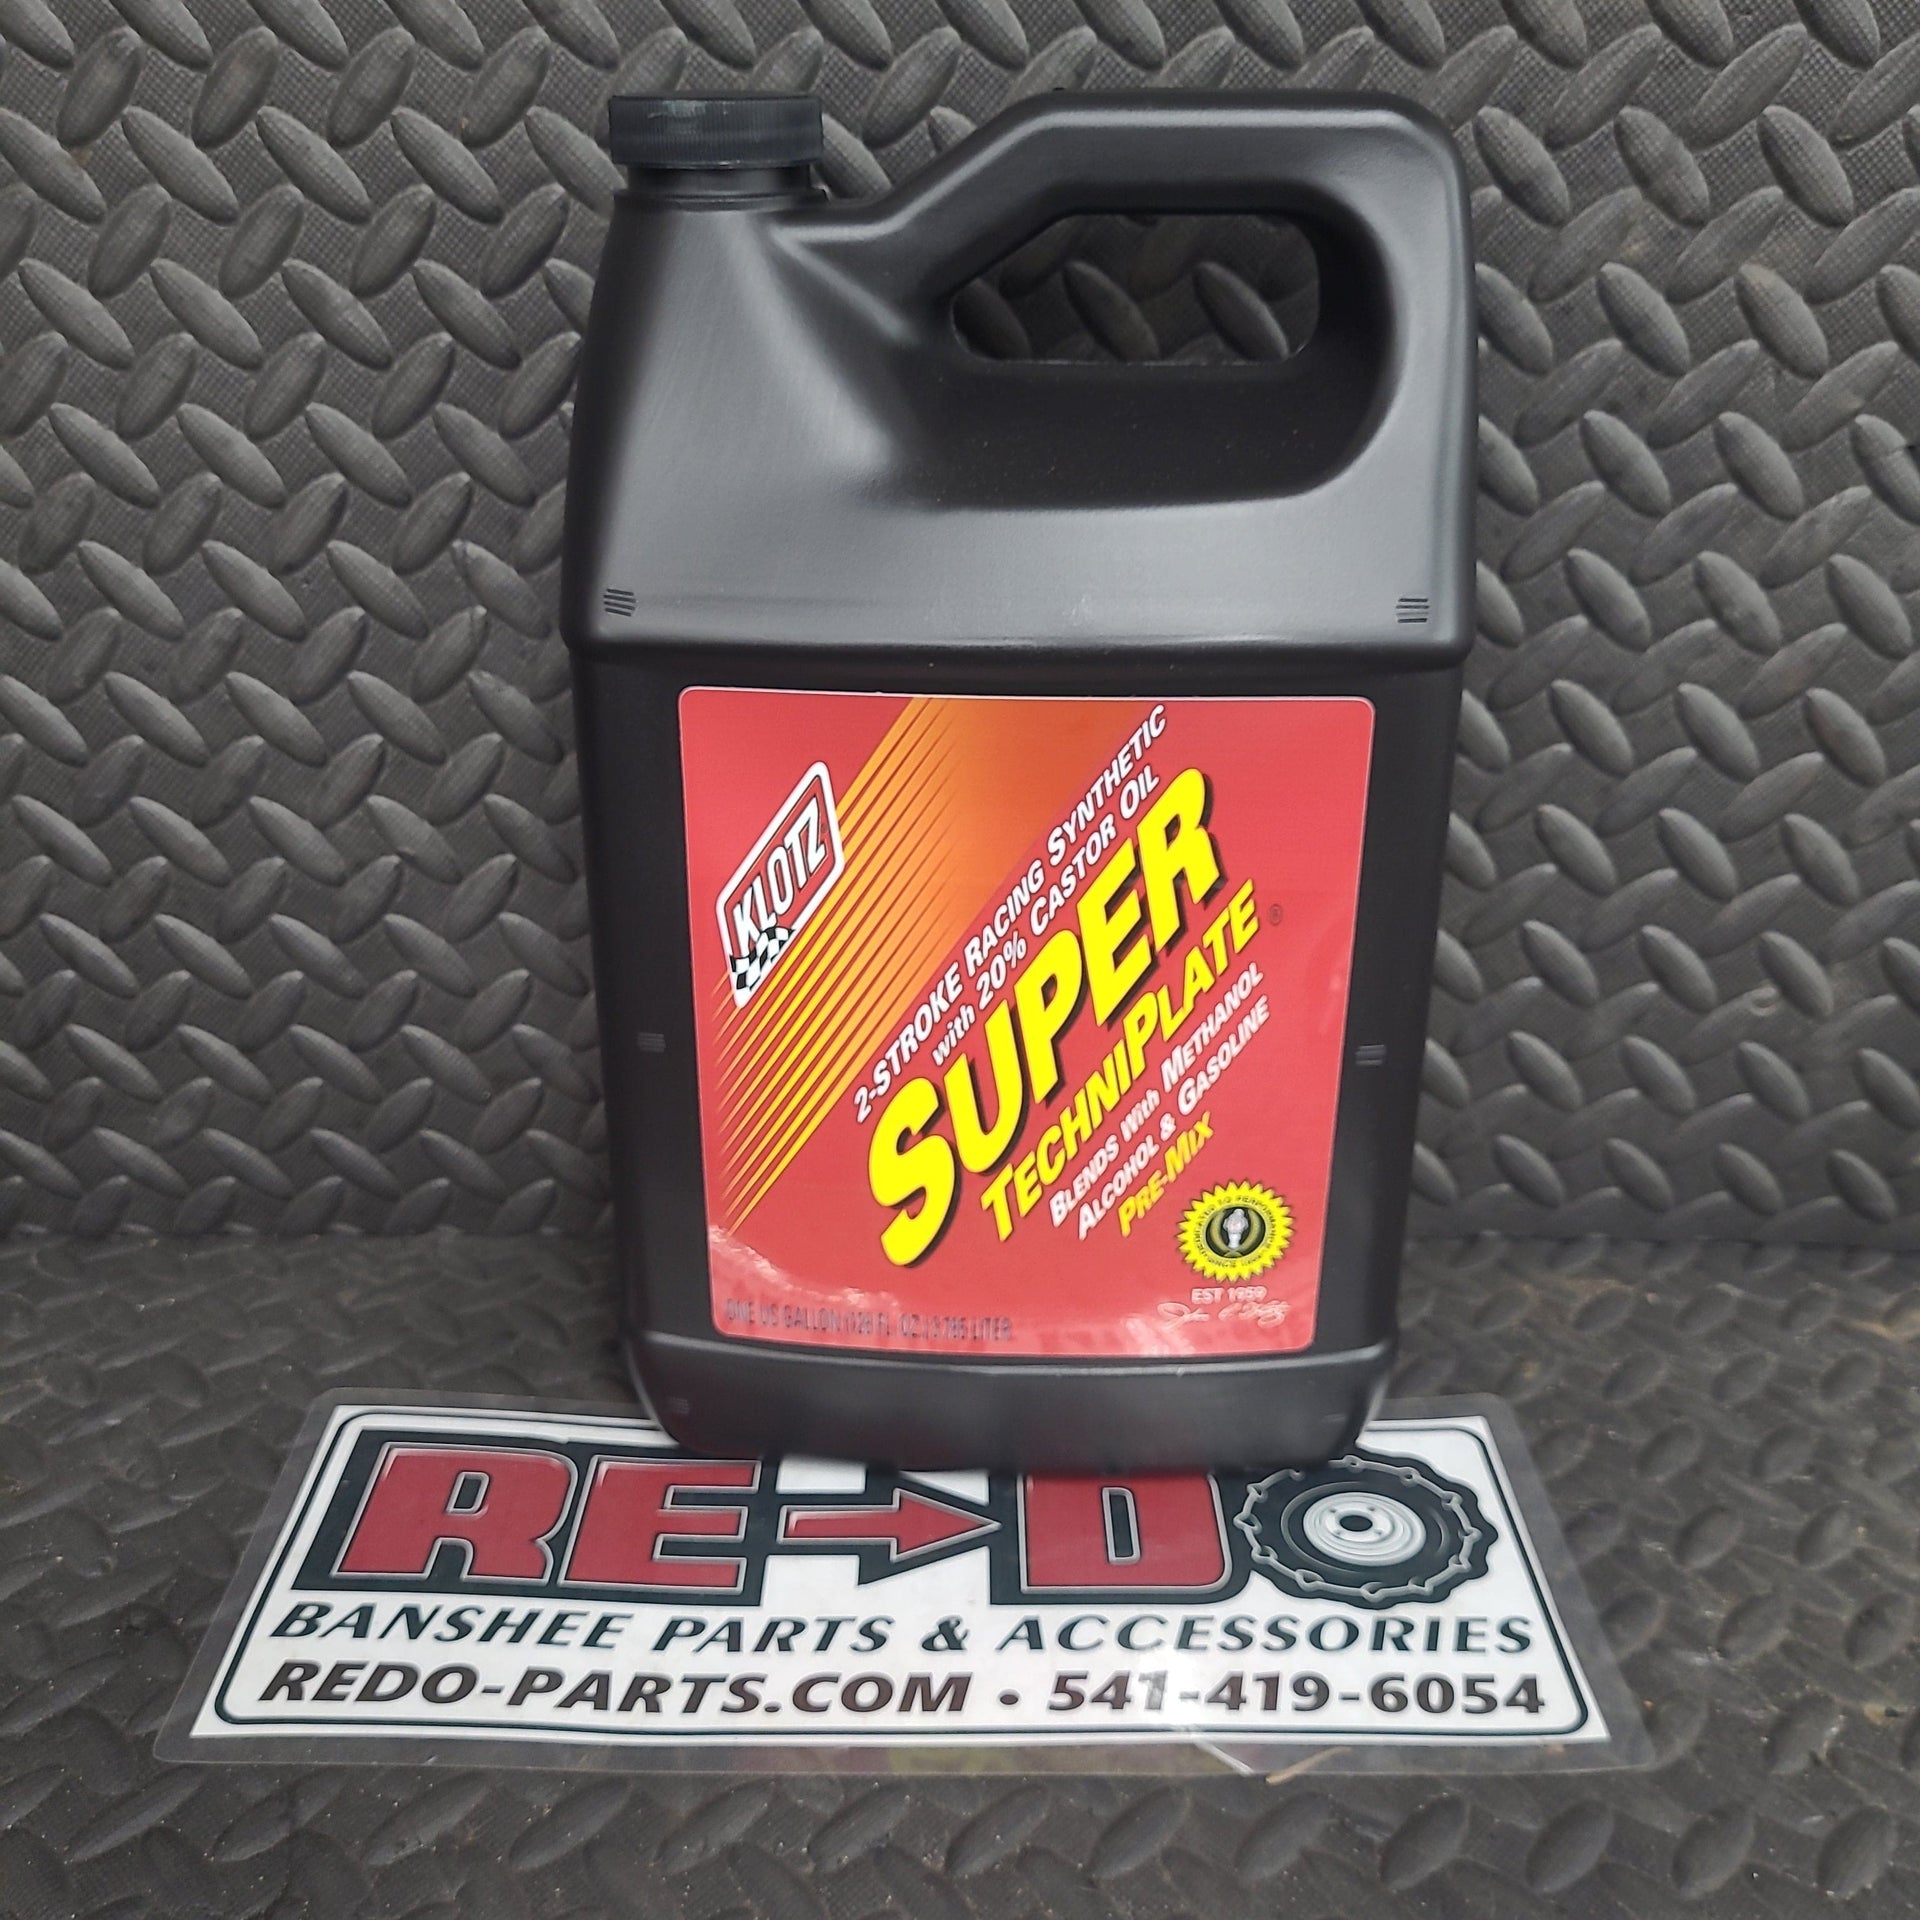 KLOTZ R-50 Racing 2-Stroke Pre-Mix Techniplate Synthetic Oil, 1 Pint * –  Re-Do Banshee Parts and Accessories